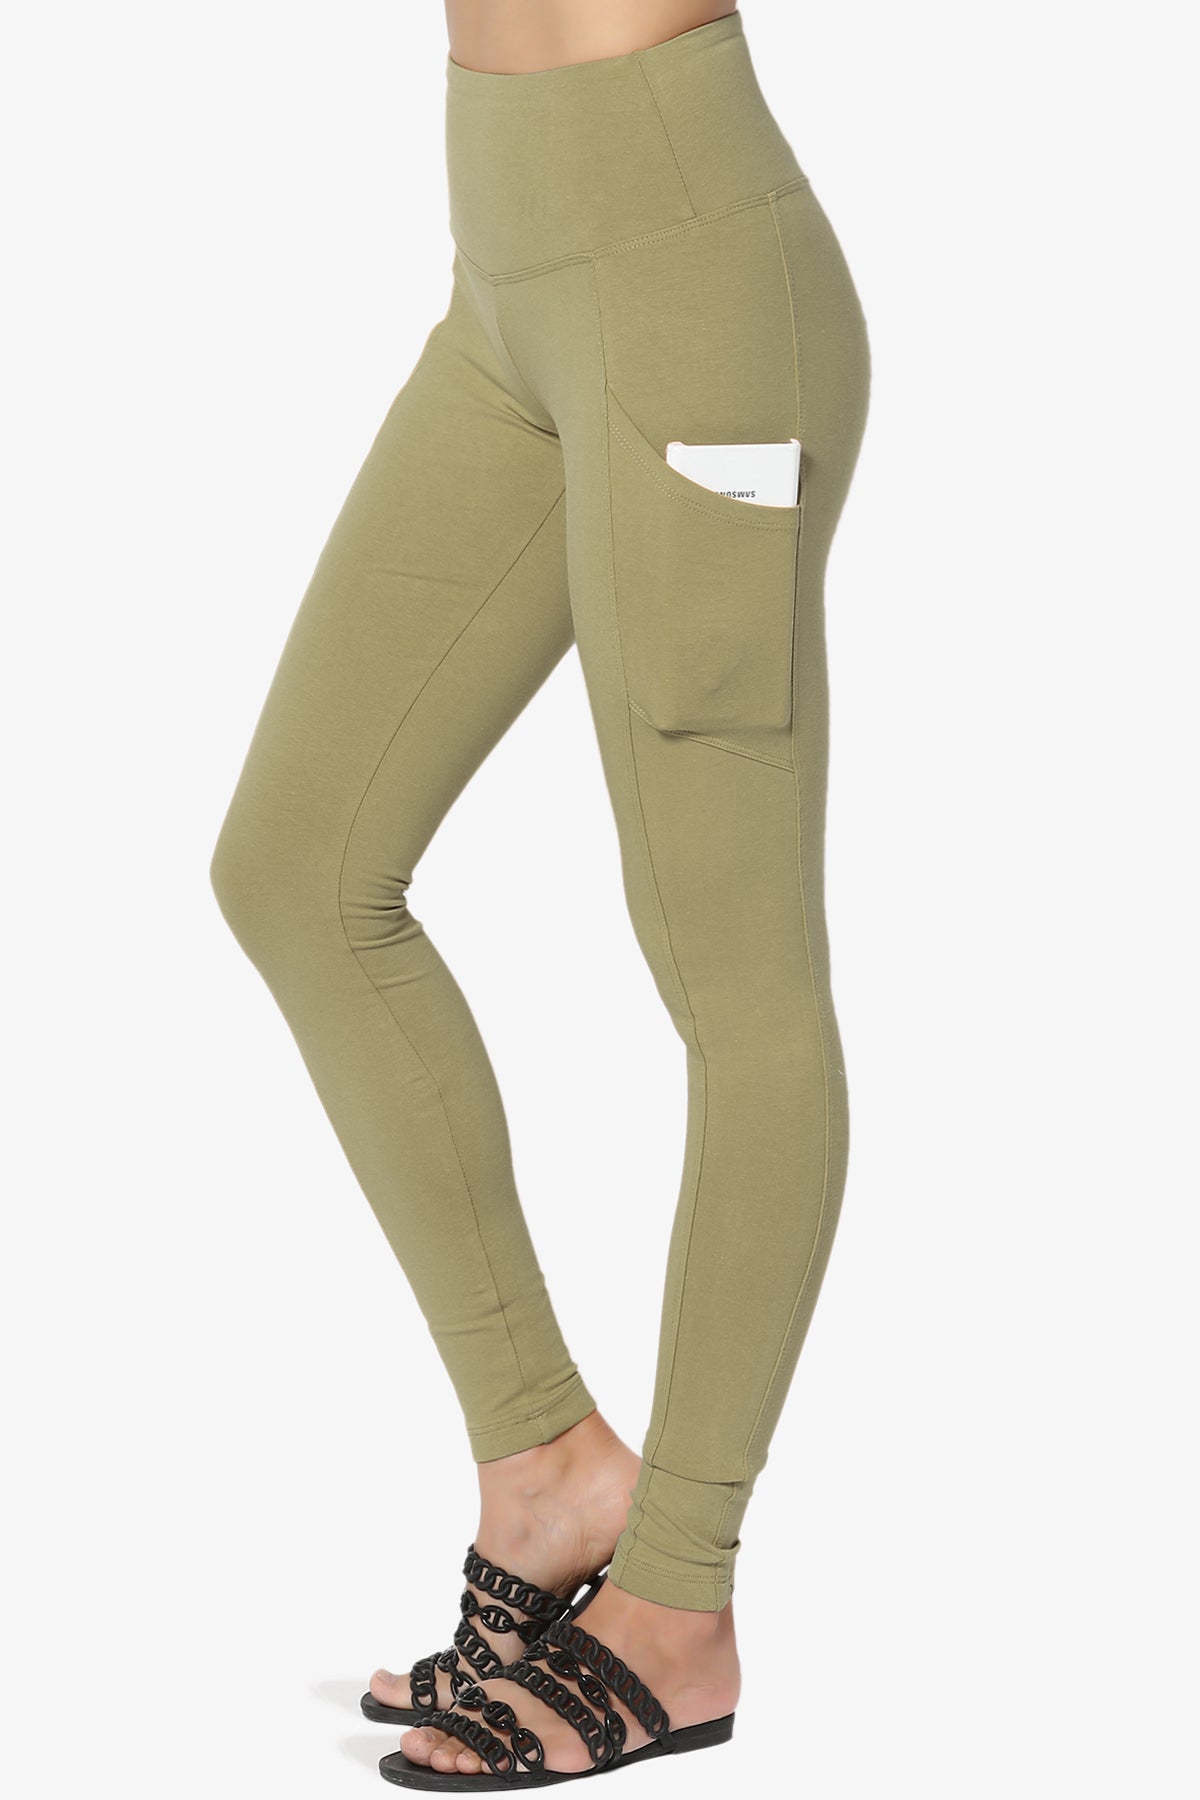 Ansley Luxe Cotton Leggings with Pockets KHAKI GREEN_1